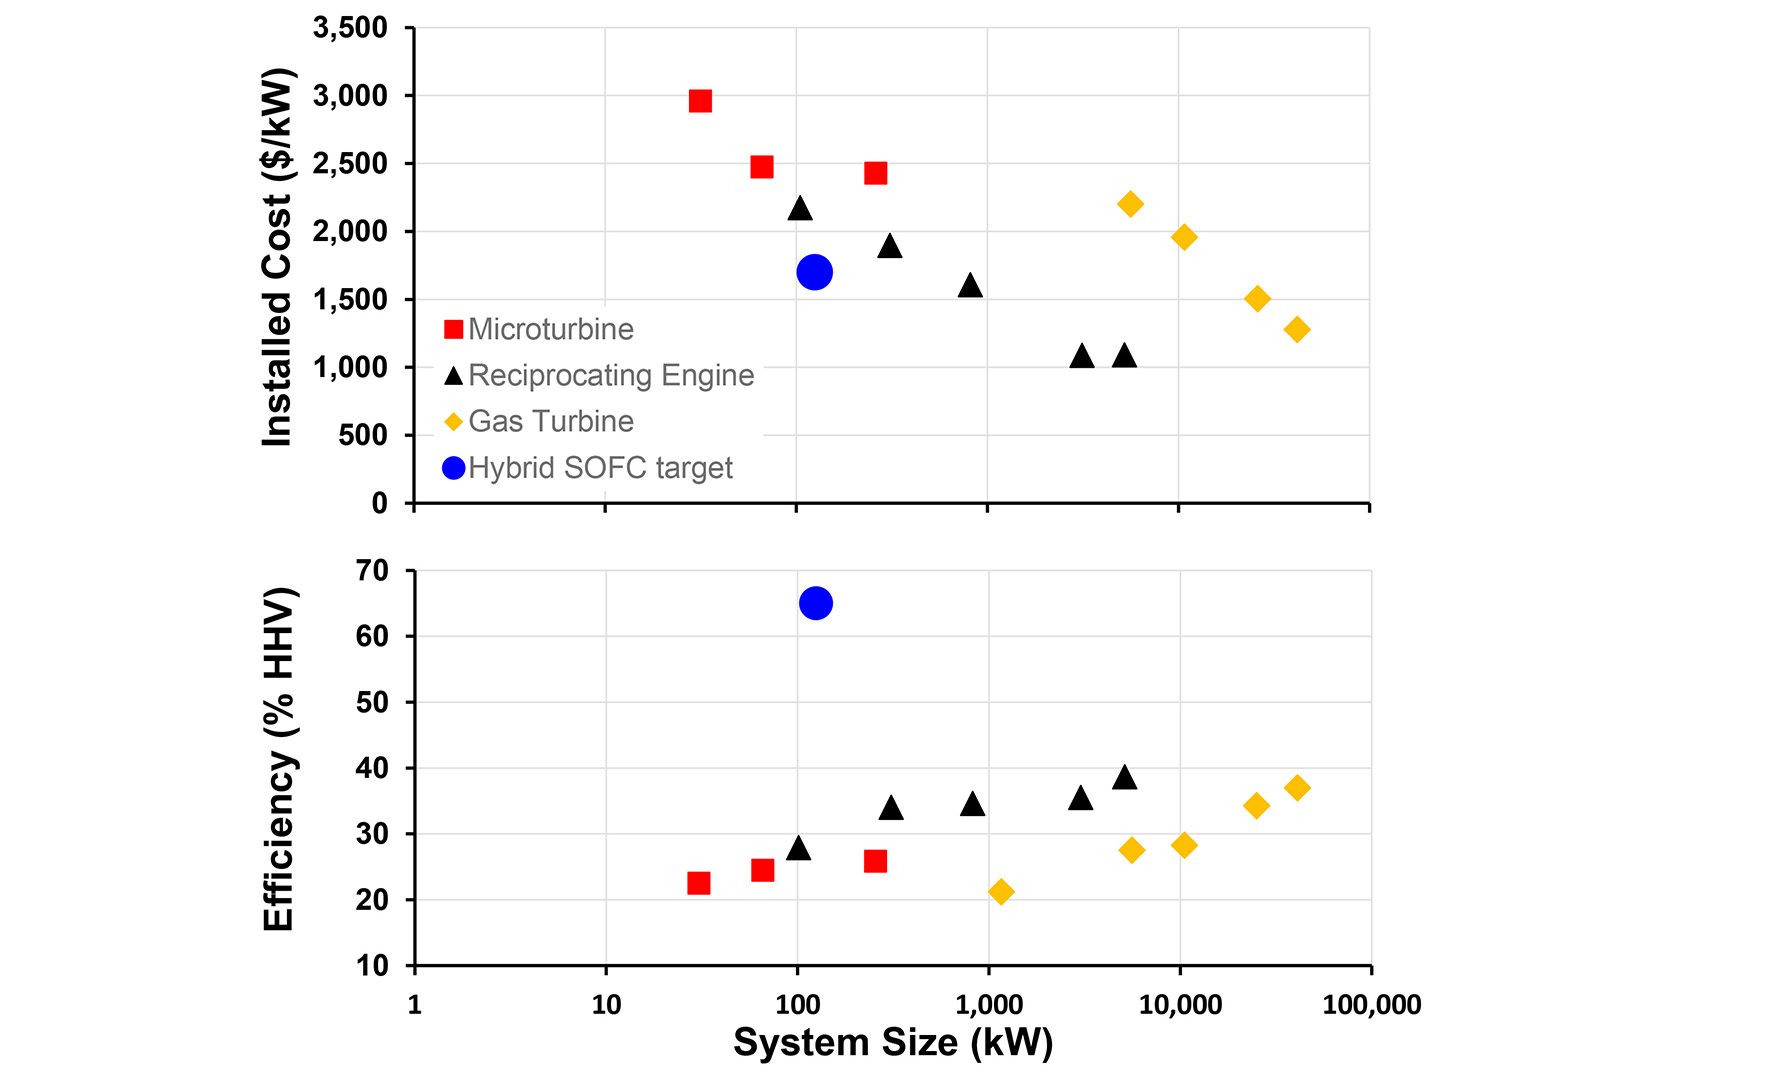 Power generation systems